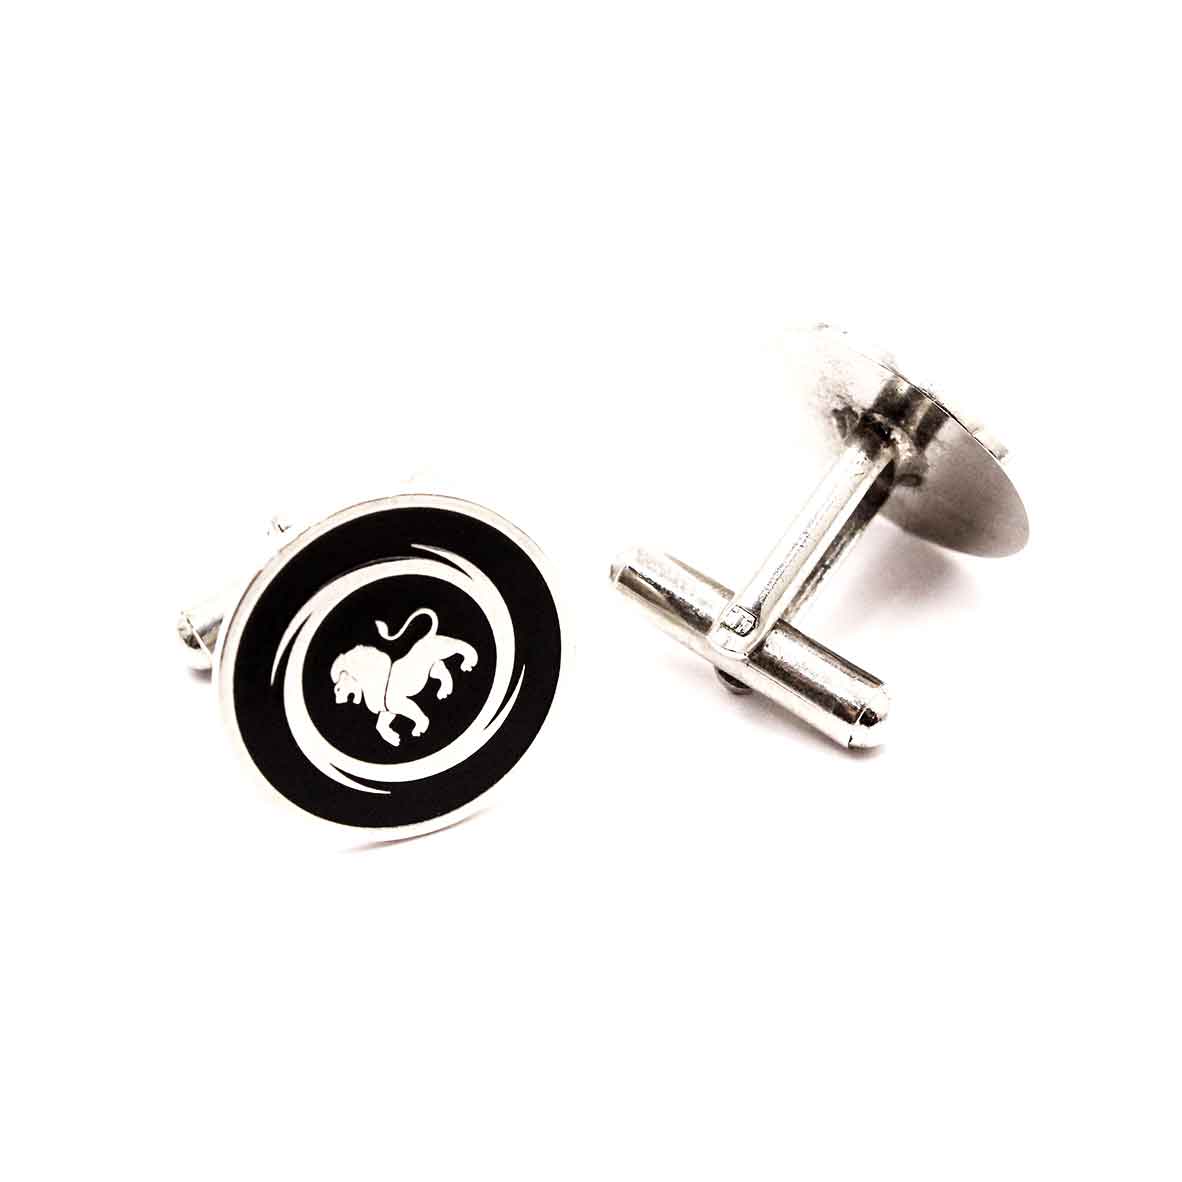 Get Customized cufflinks or photoprint cufflinks in your designs and needs